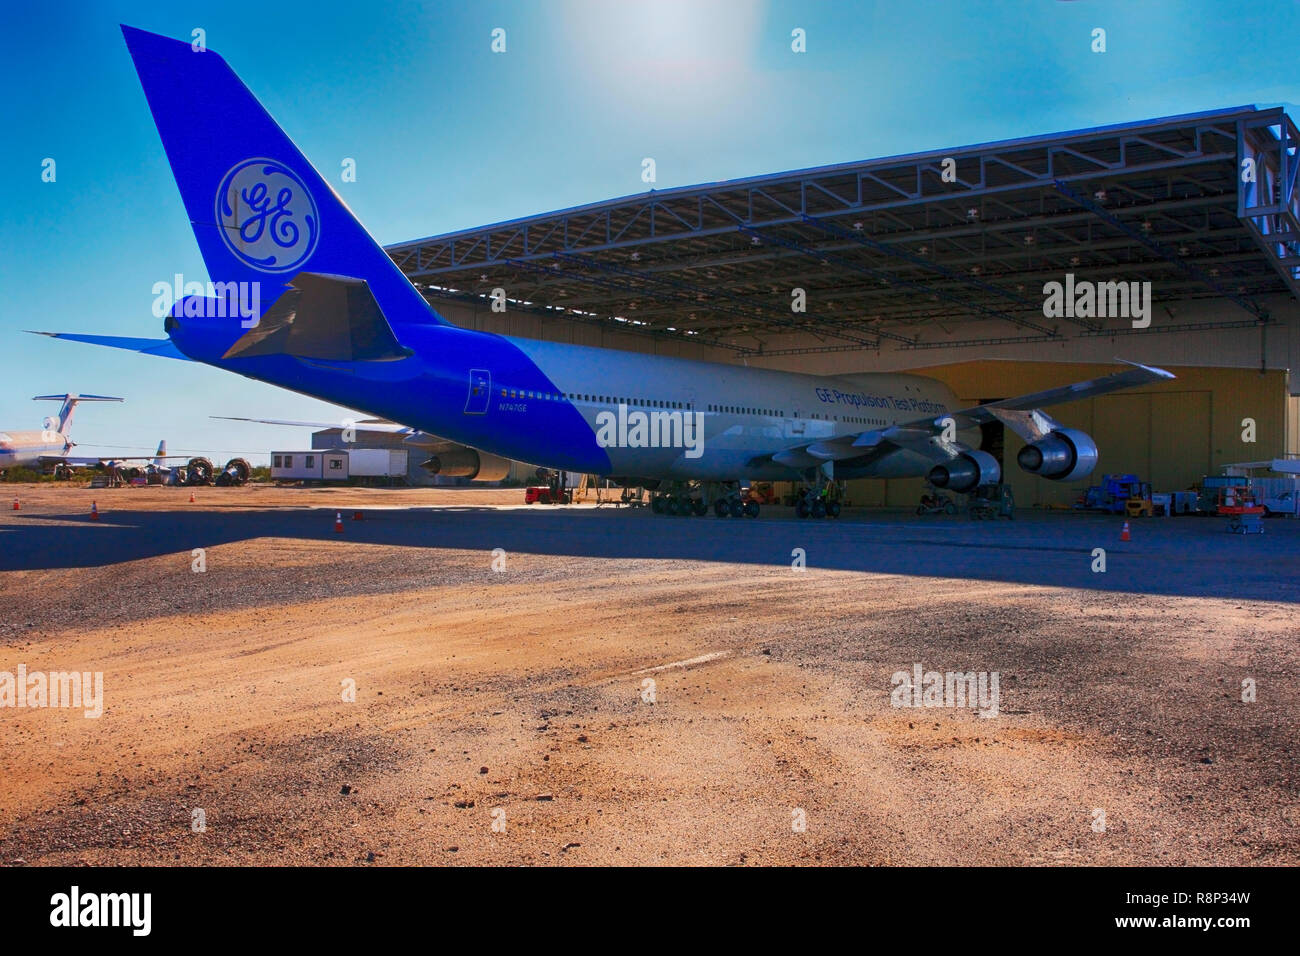 GE Propulsion Test Platform Boeing 747 plane on display at the Pima Air & Space Museum in Tucson, AZ Stock Photo